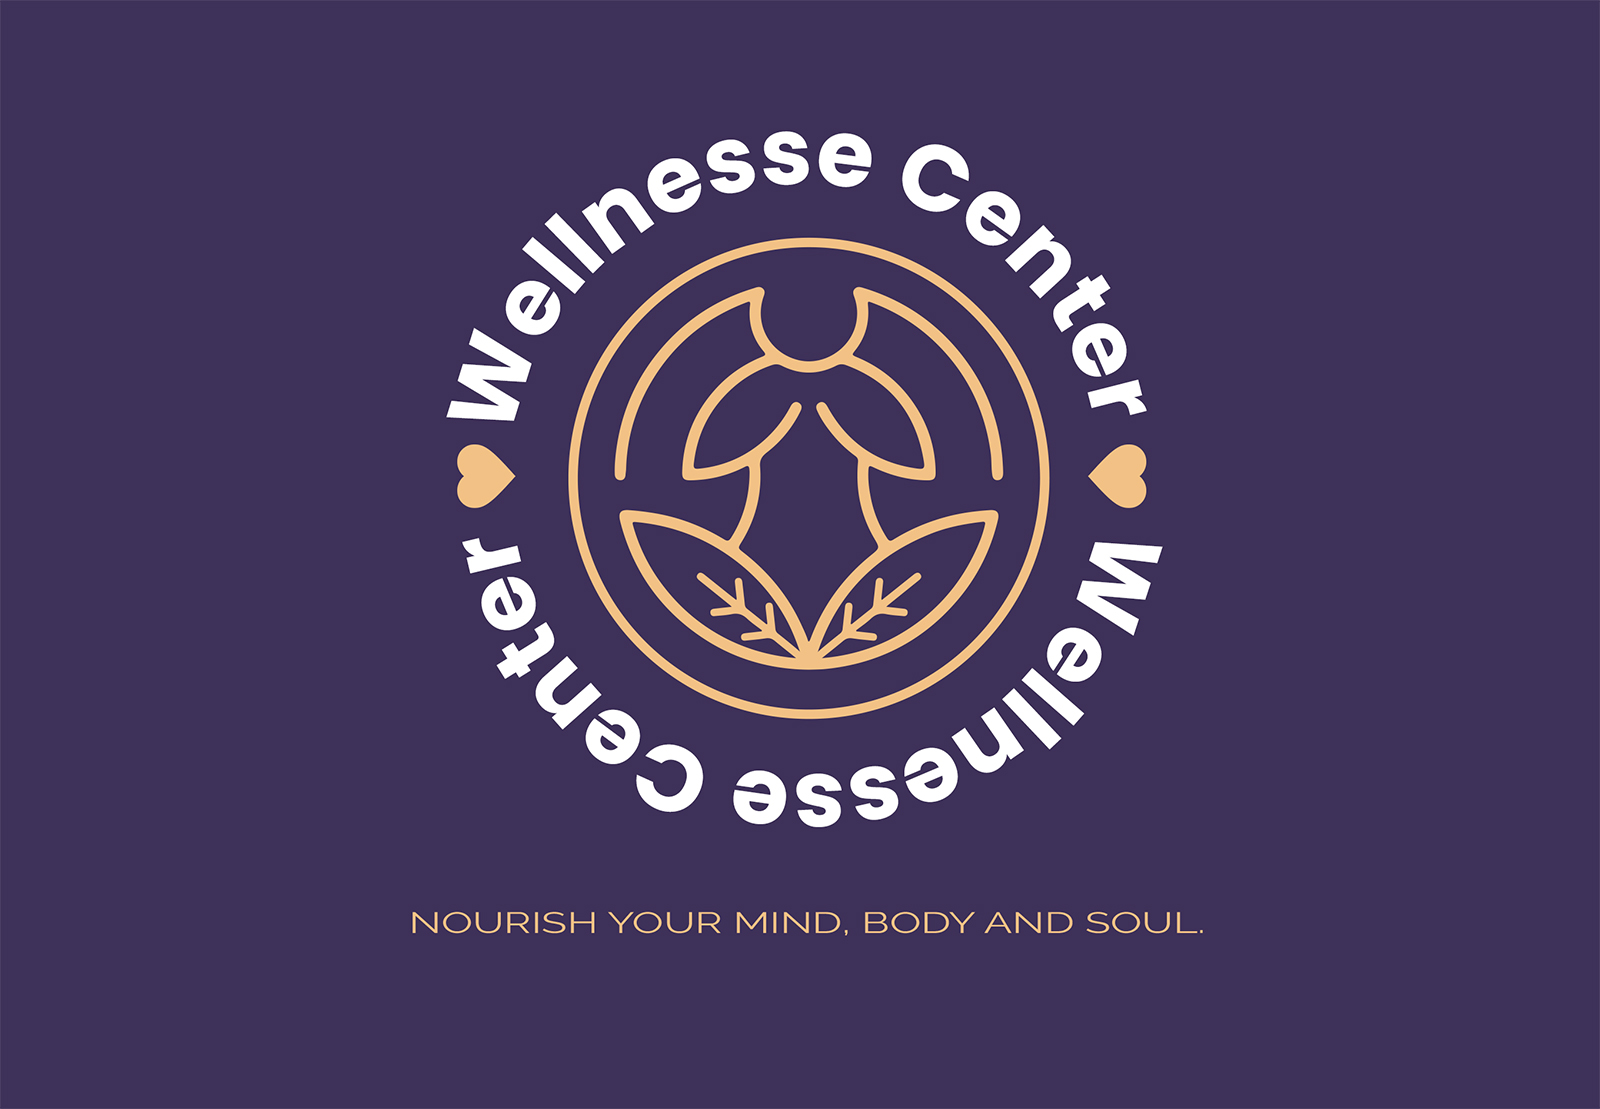 Elevate Your Fitness Experience with Wellnesse Center's Complete Gym Setup Solutions